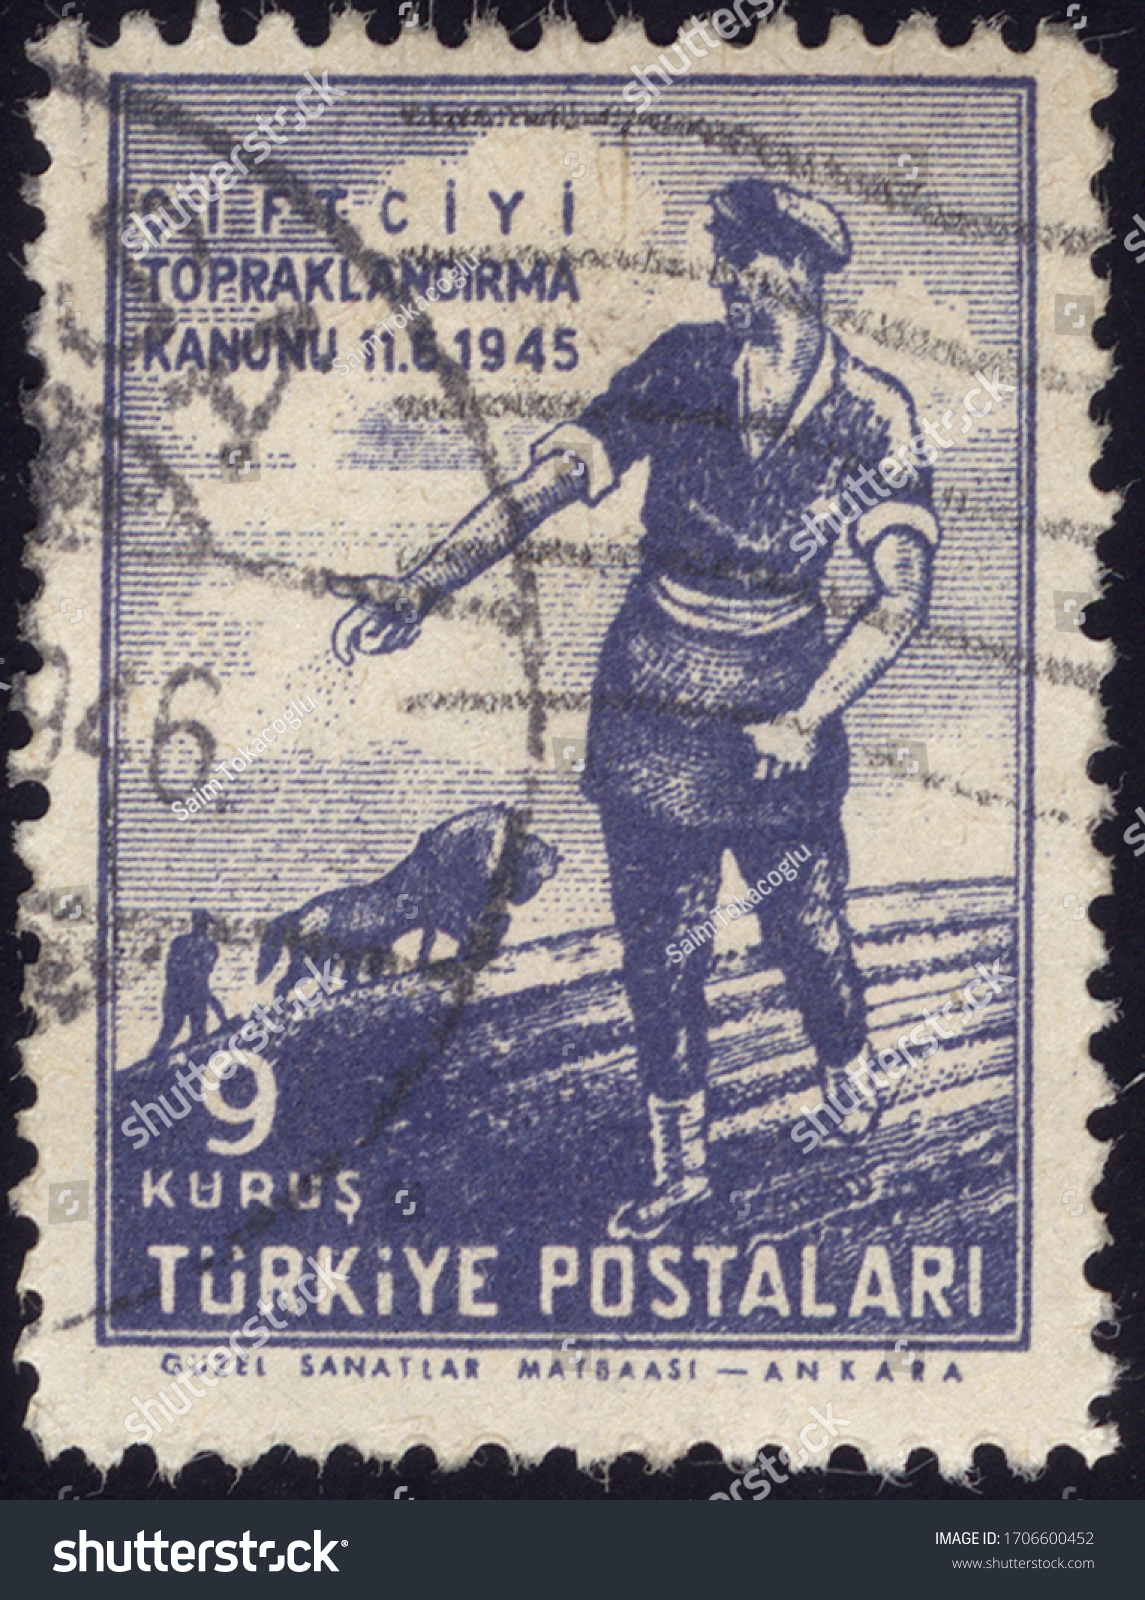 Postage stamps of the Republic of Turkey is offset printing Postal Telegraph and Telephone institutions. Republic of Turkey postage stamps. #1706600452